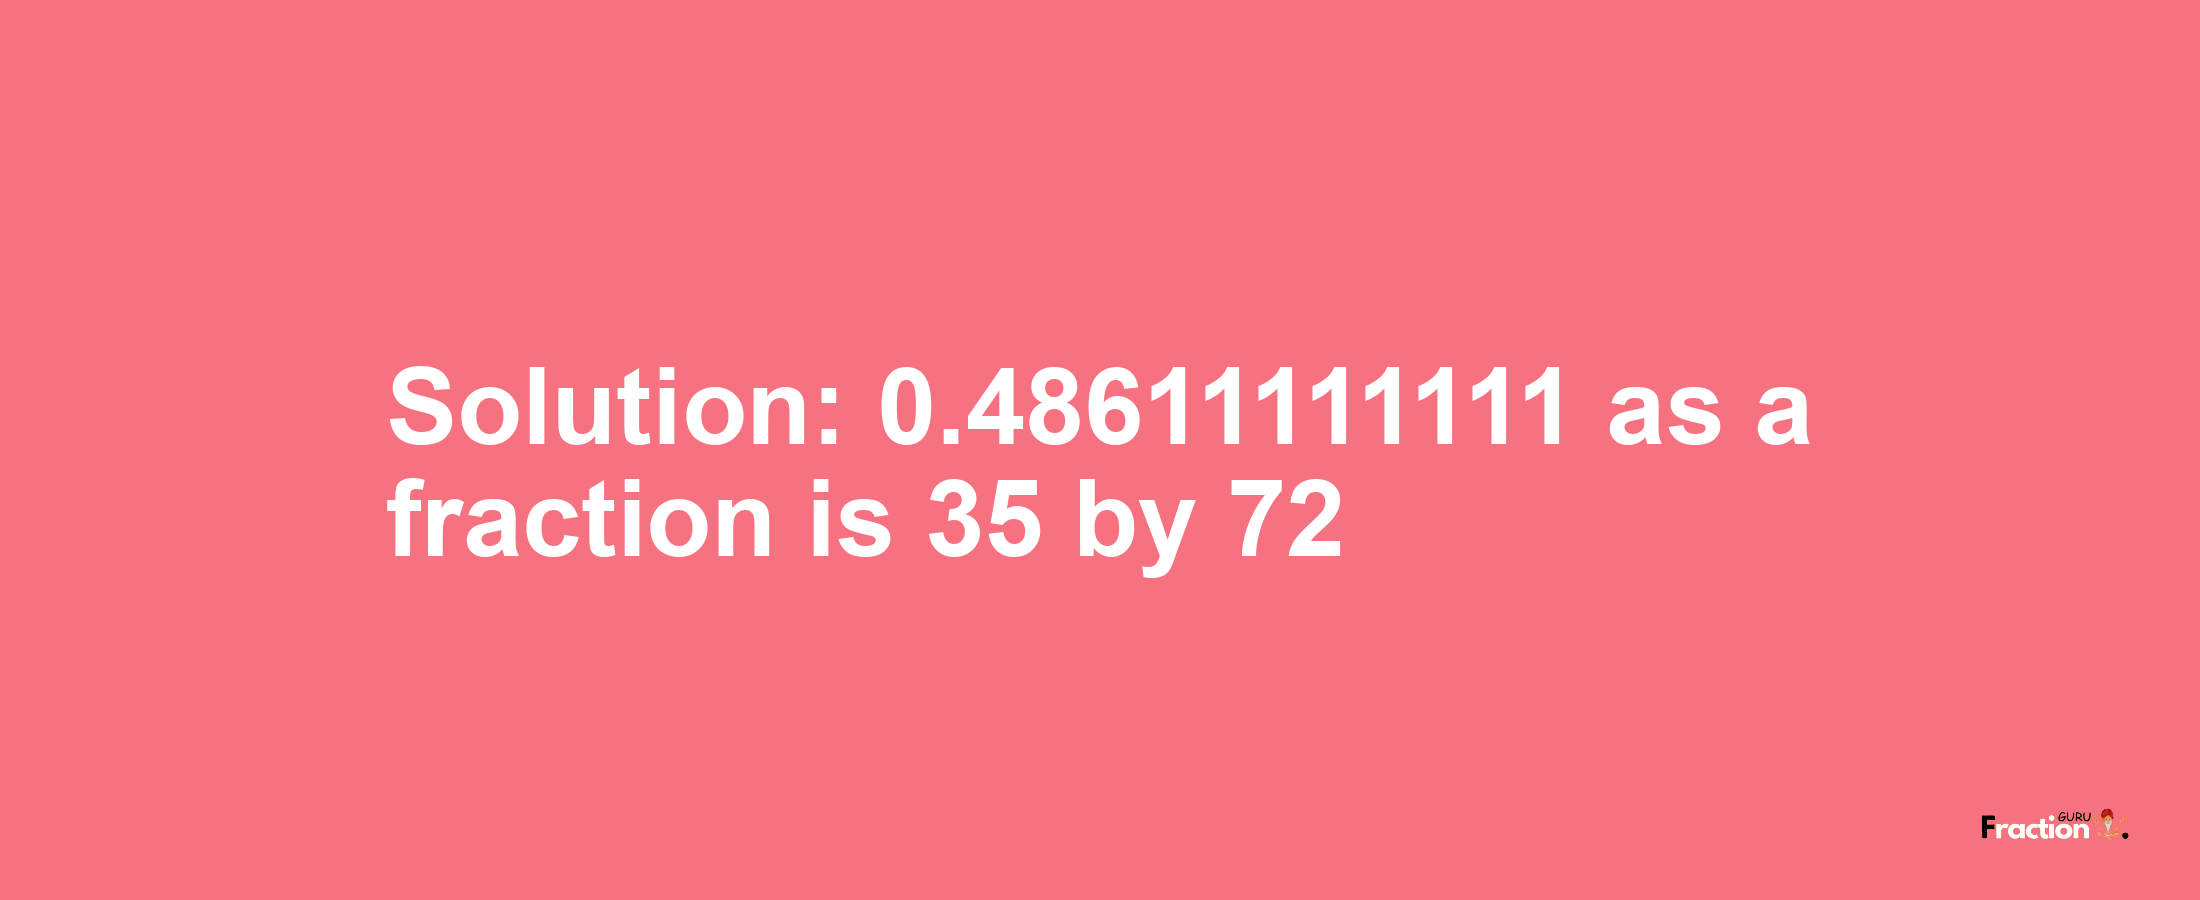 Solution:0.48611111111 as a fraction is 35/72